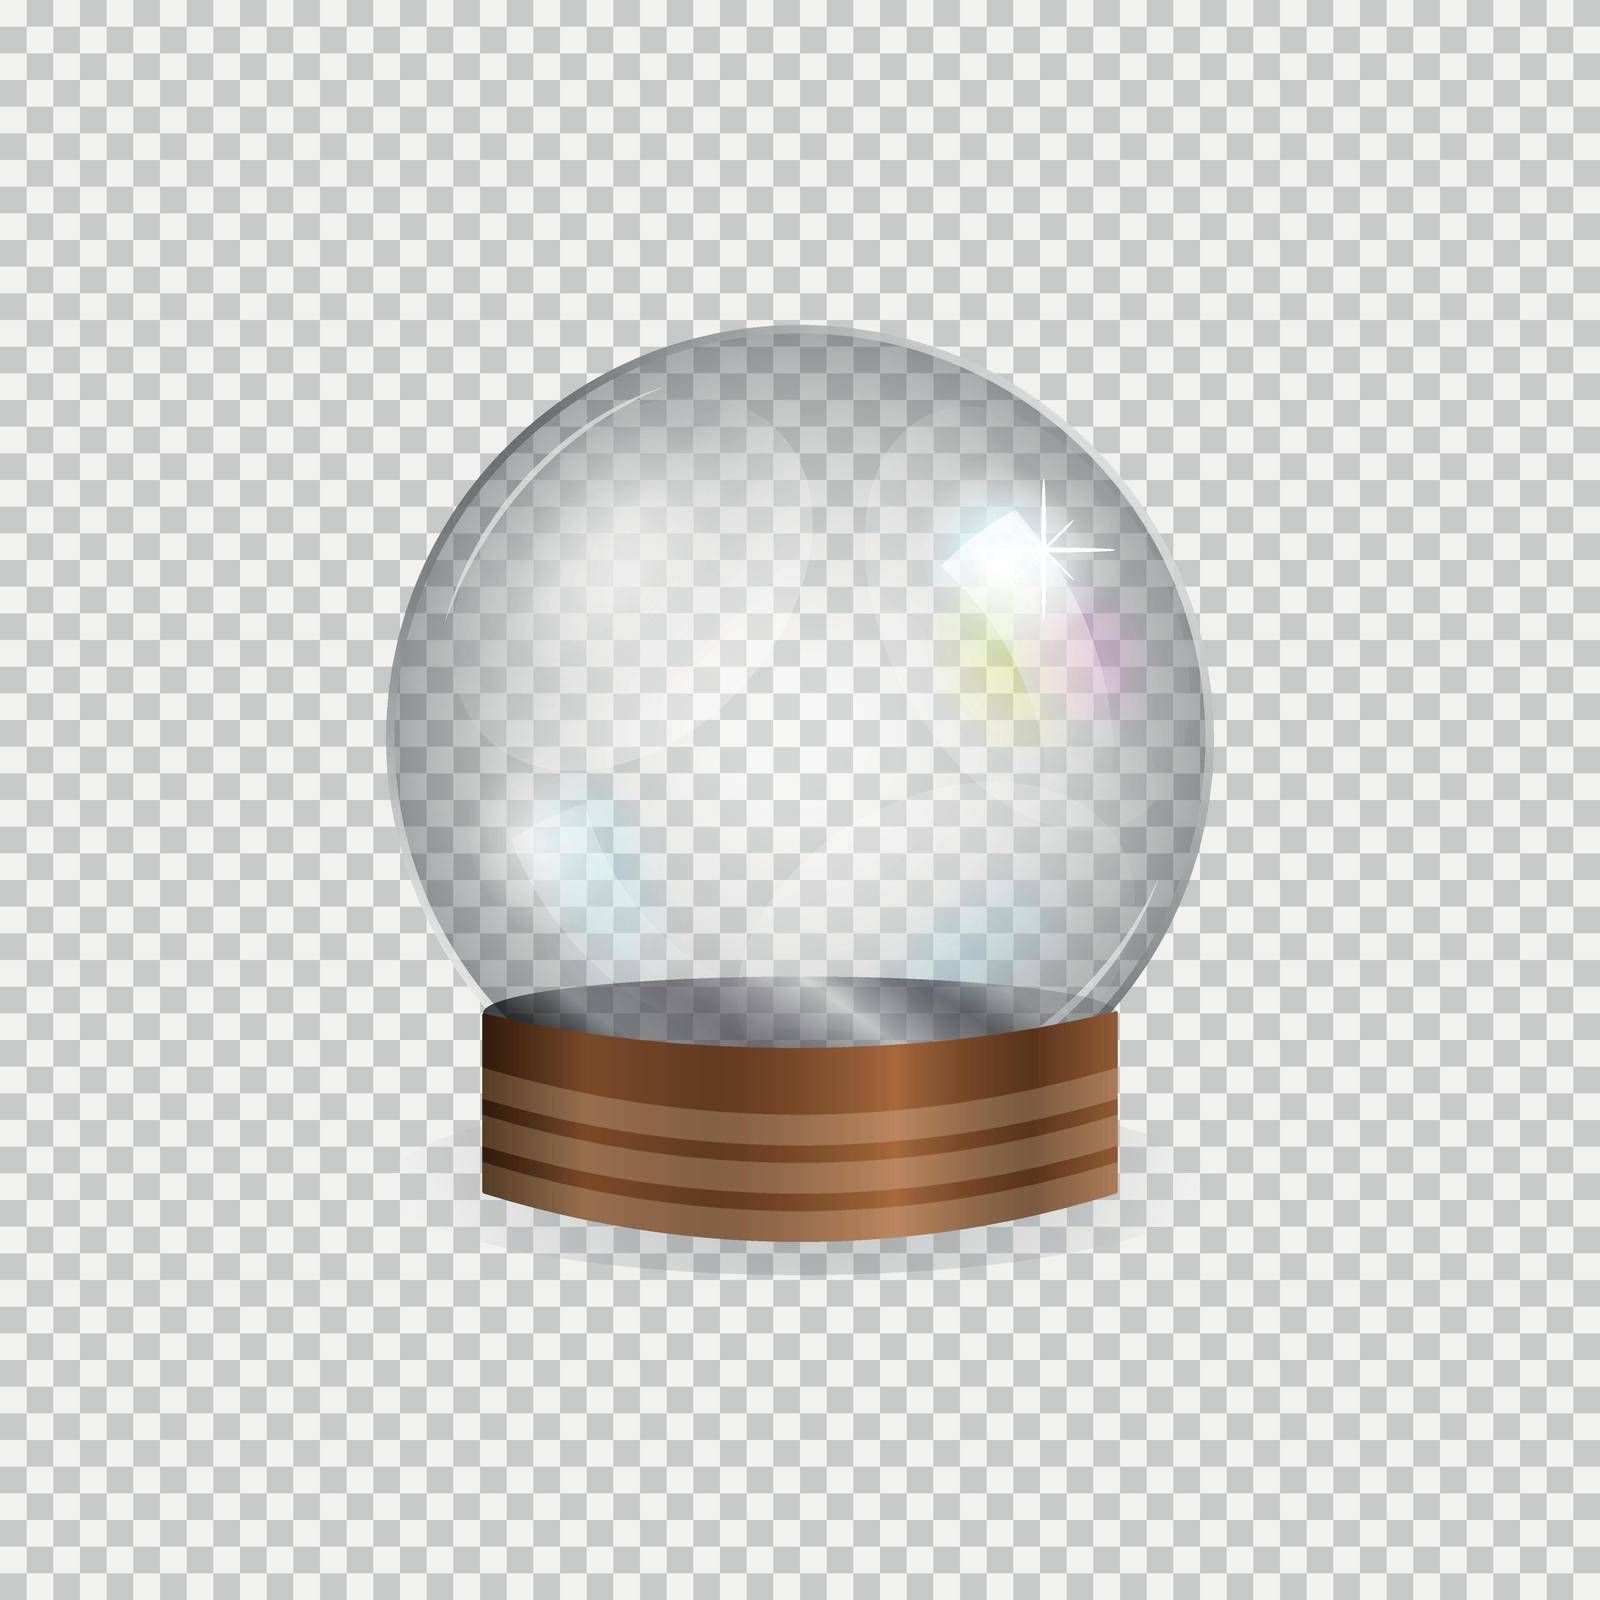 Realistic glass empty snow globe isolated on transparent background.